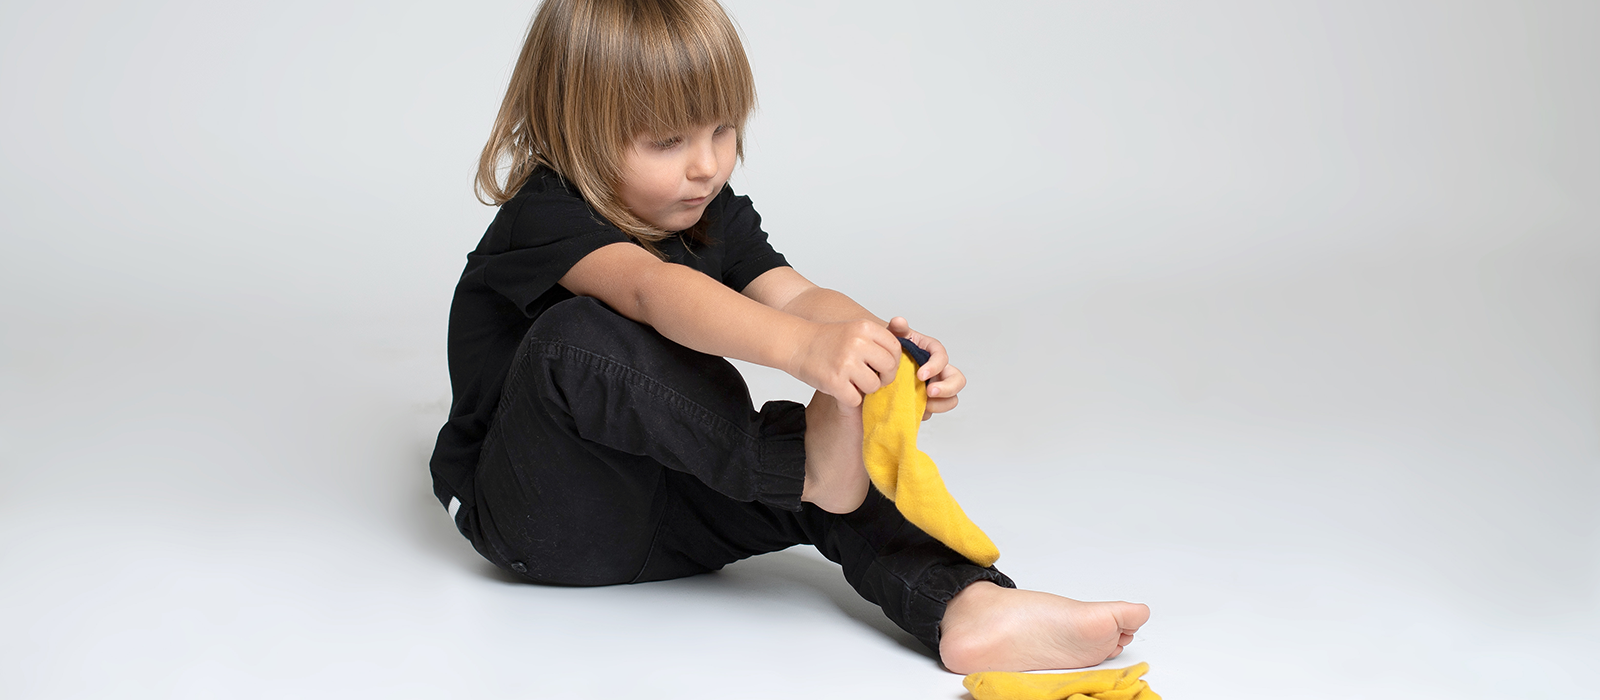 Young girl putting on a pair of yellow socks